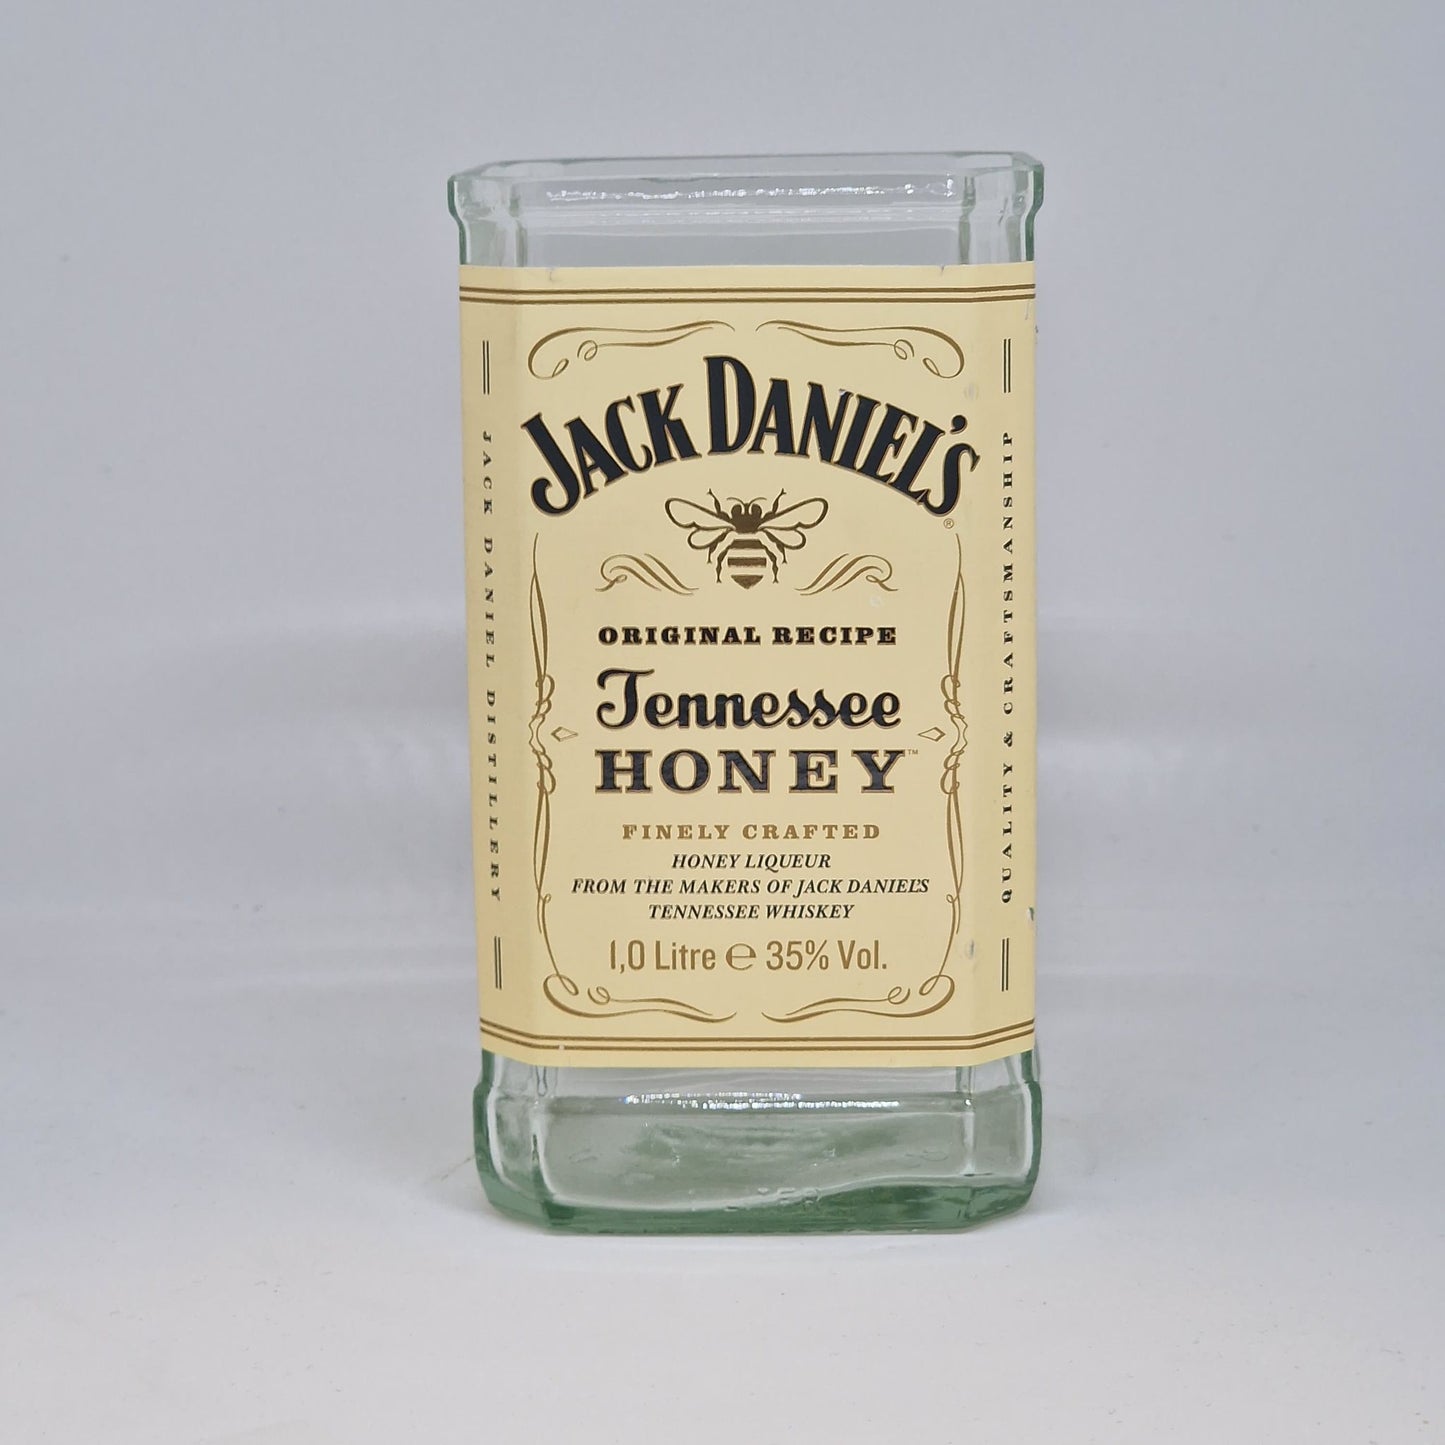 Jack Daniels Tennessee Honey Whiskey Bottle Candle 1L